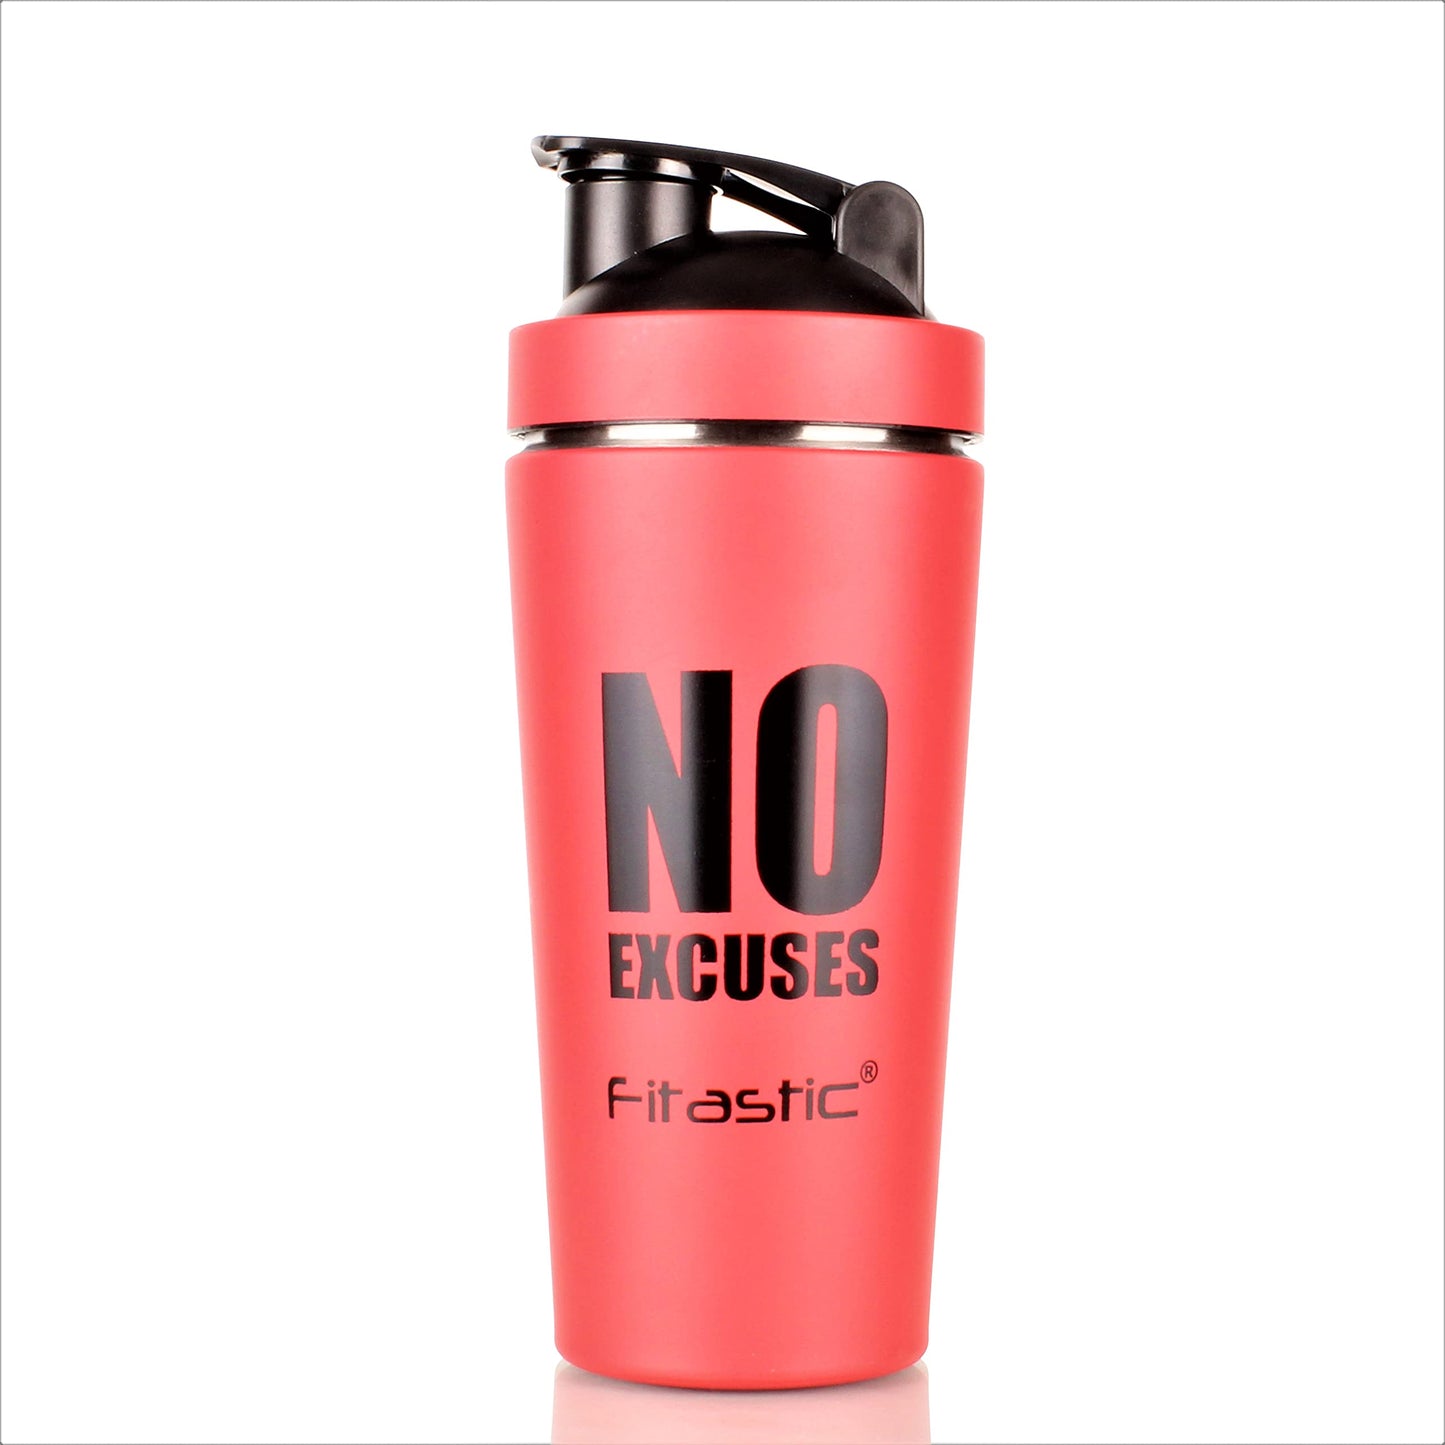 FITASTIC Stainless Steel 750 ml Shaker bottle With Steel Ball, Matt Red Finish (NO EXCUSES, Pack of 1)